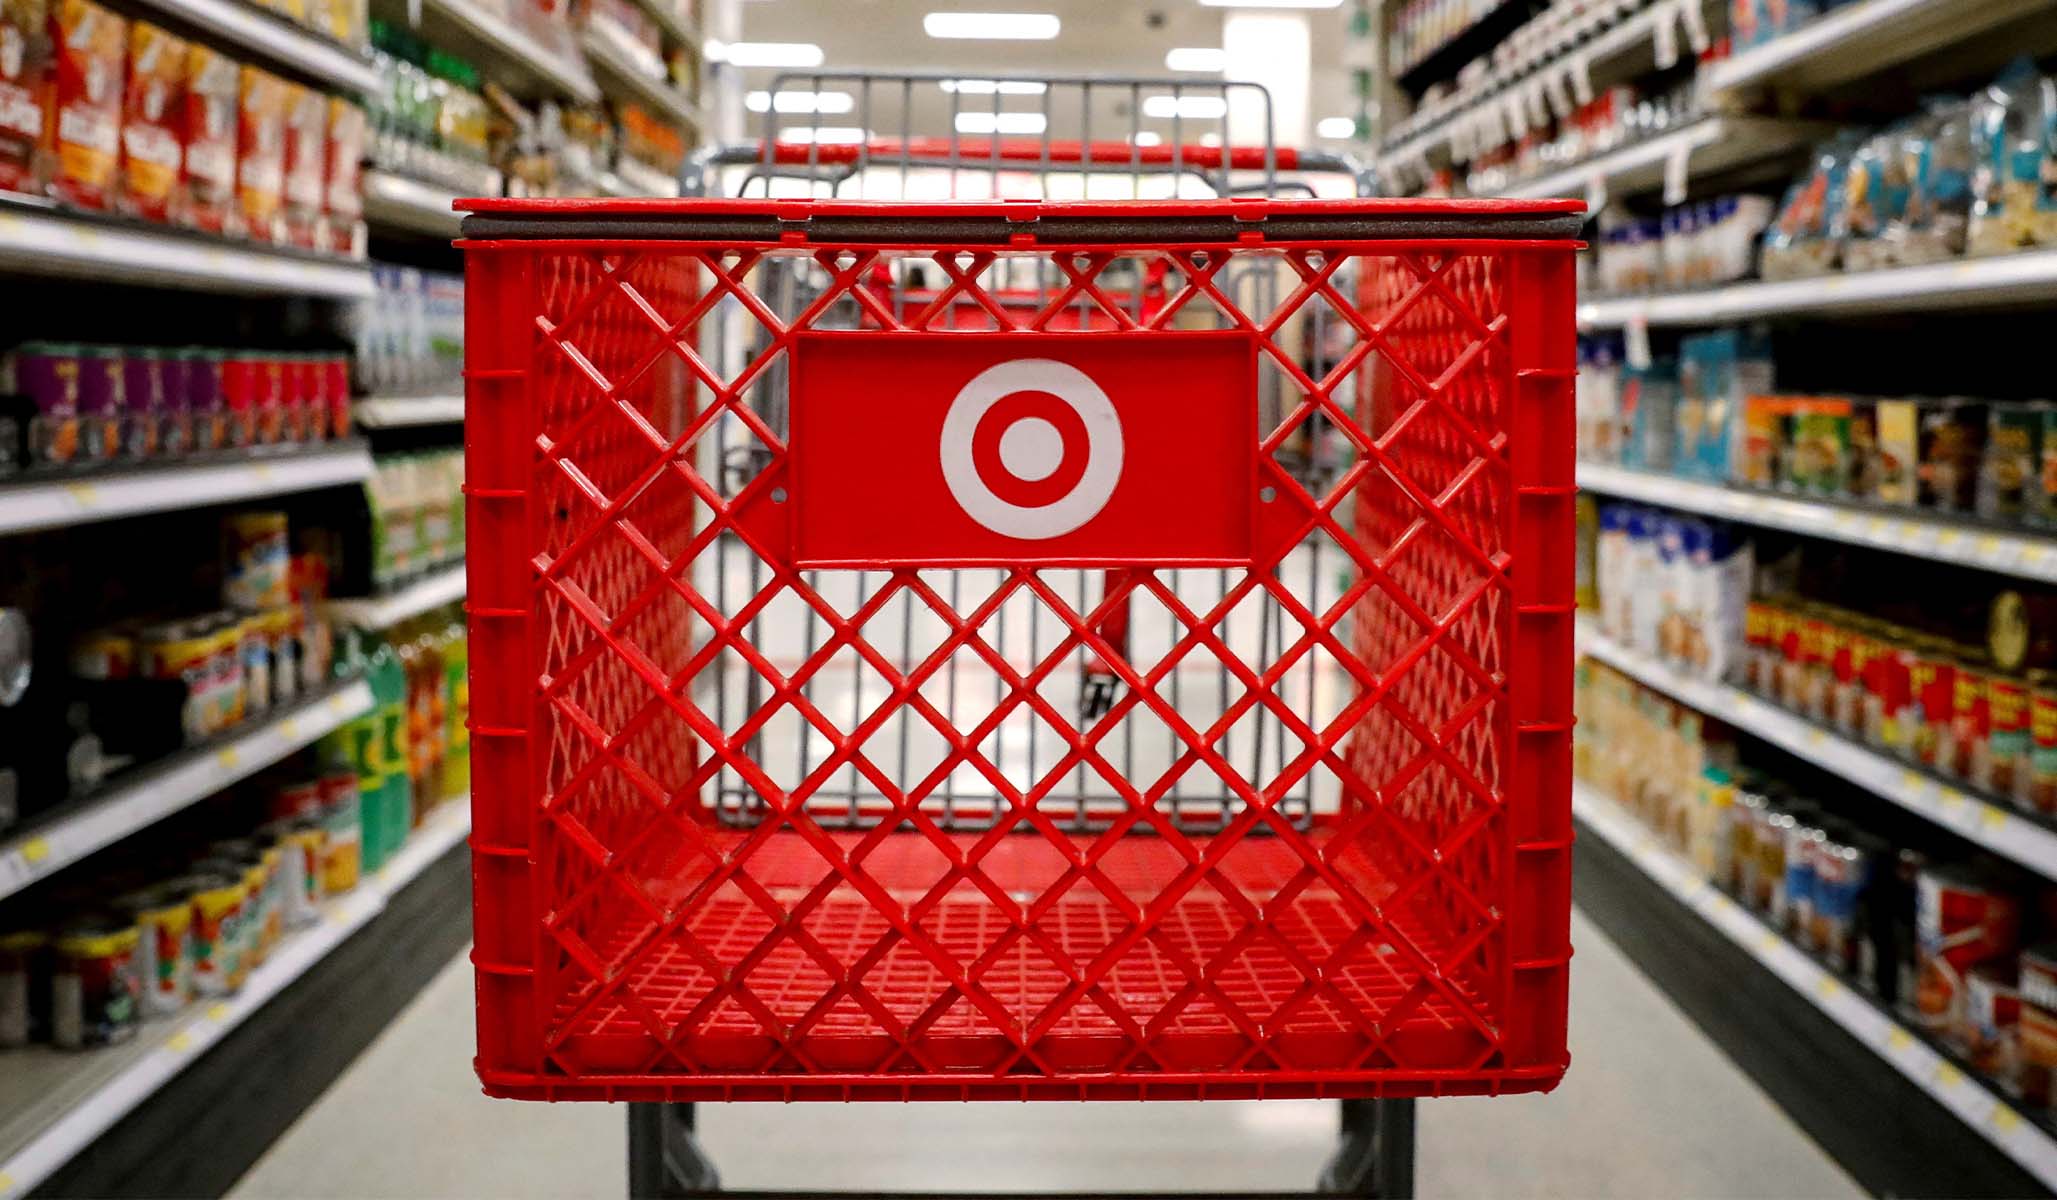 Target Reportedly Moving ‘Pride’ Items to Back of Store to Avoid the Bud Light Treatment